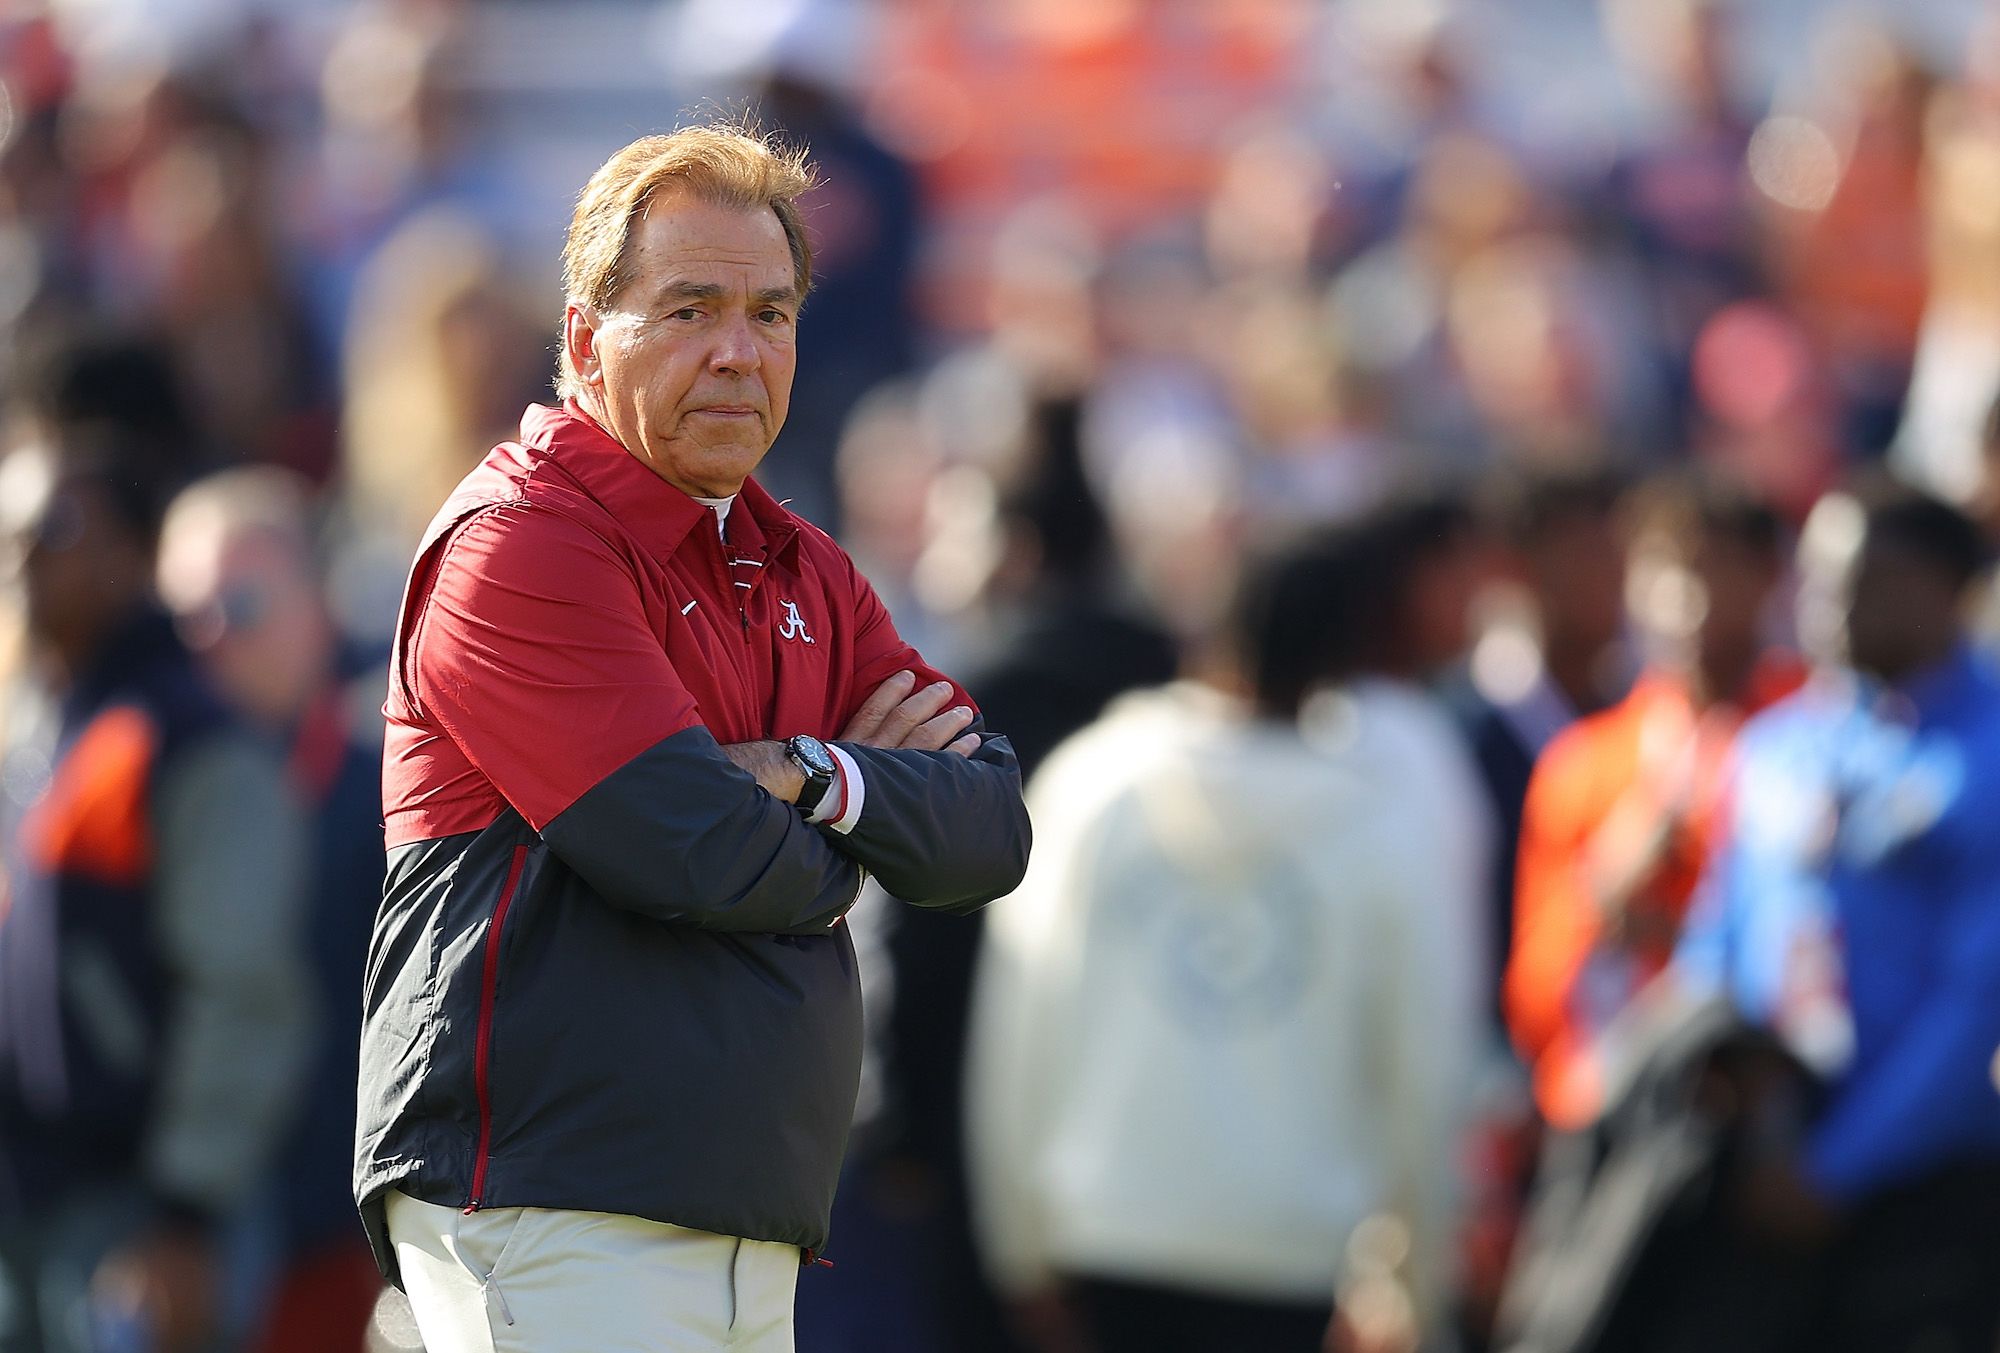 Former football coach Nick Saban laments the current landscape of college sports - Education - News